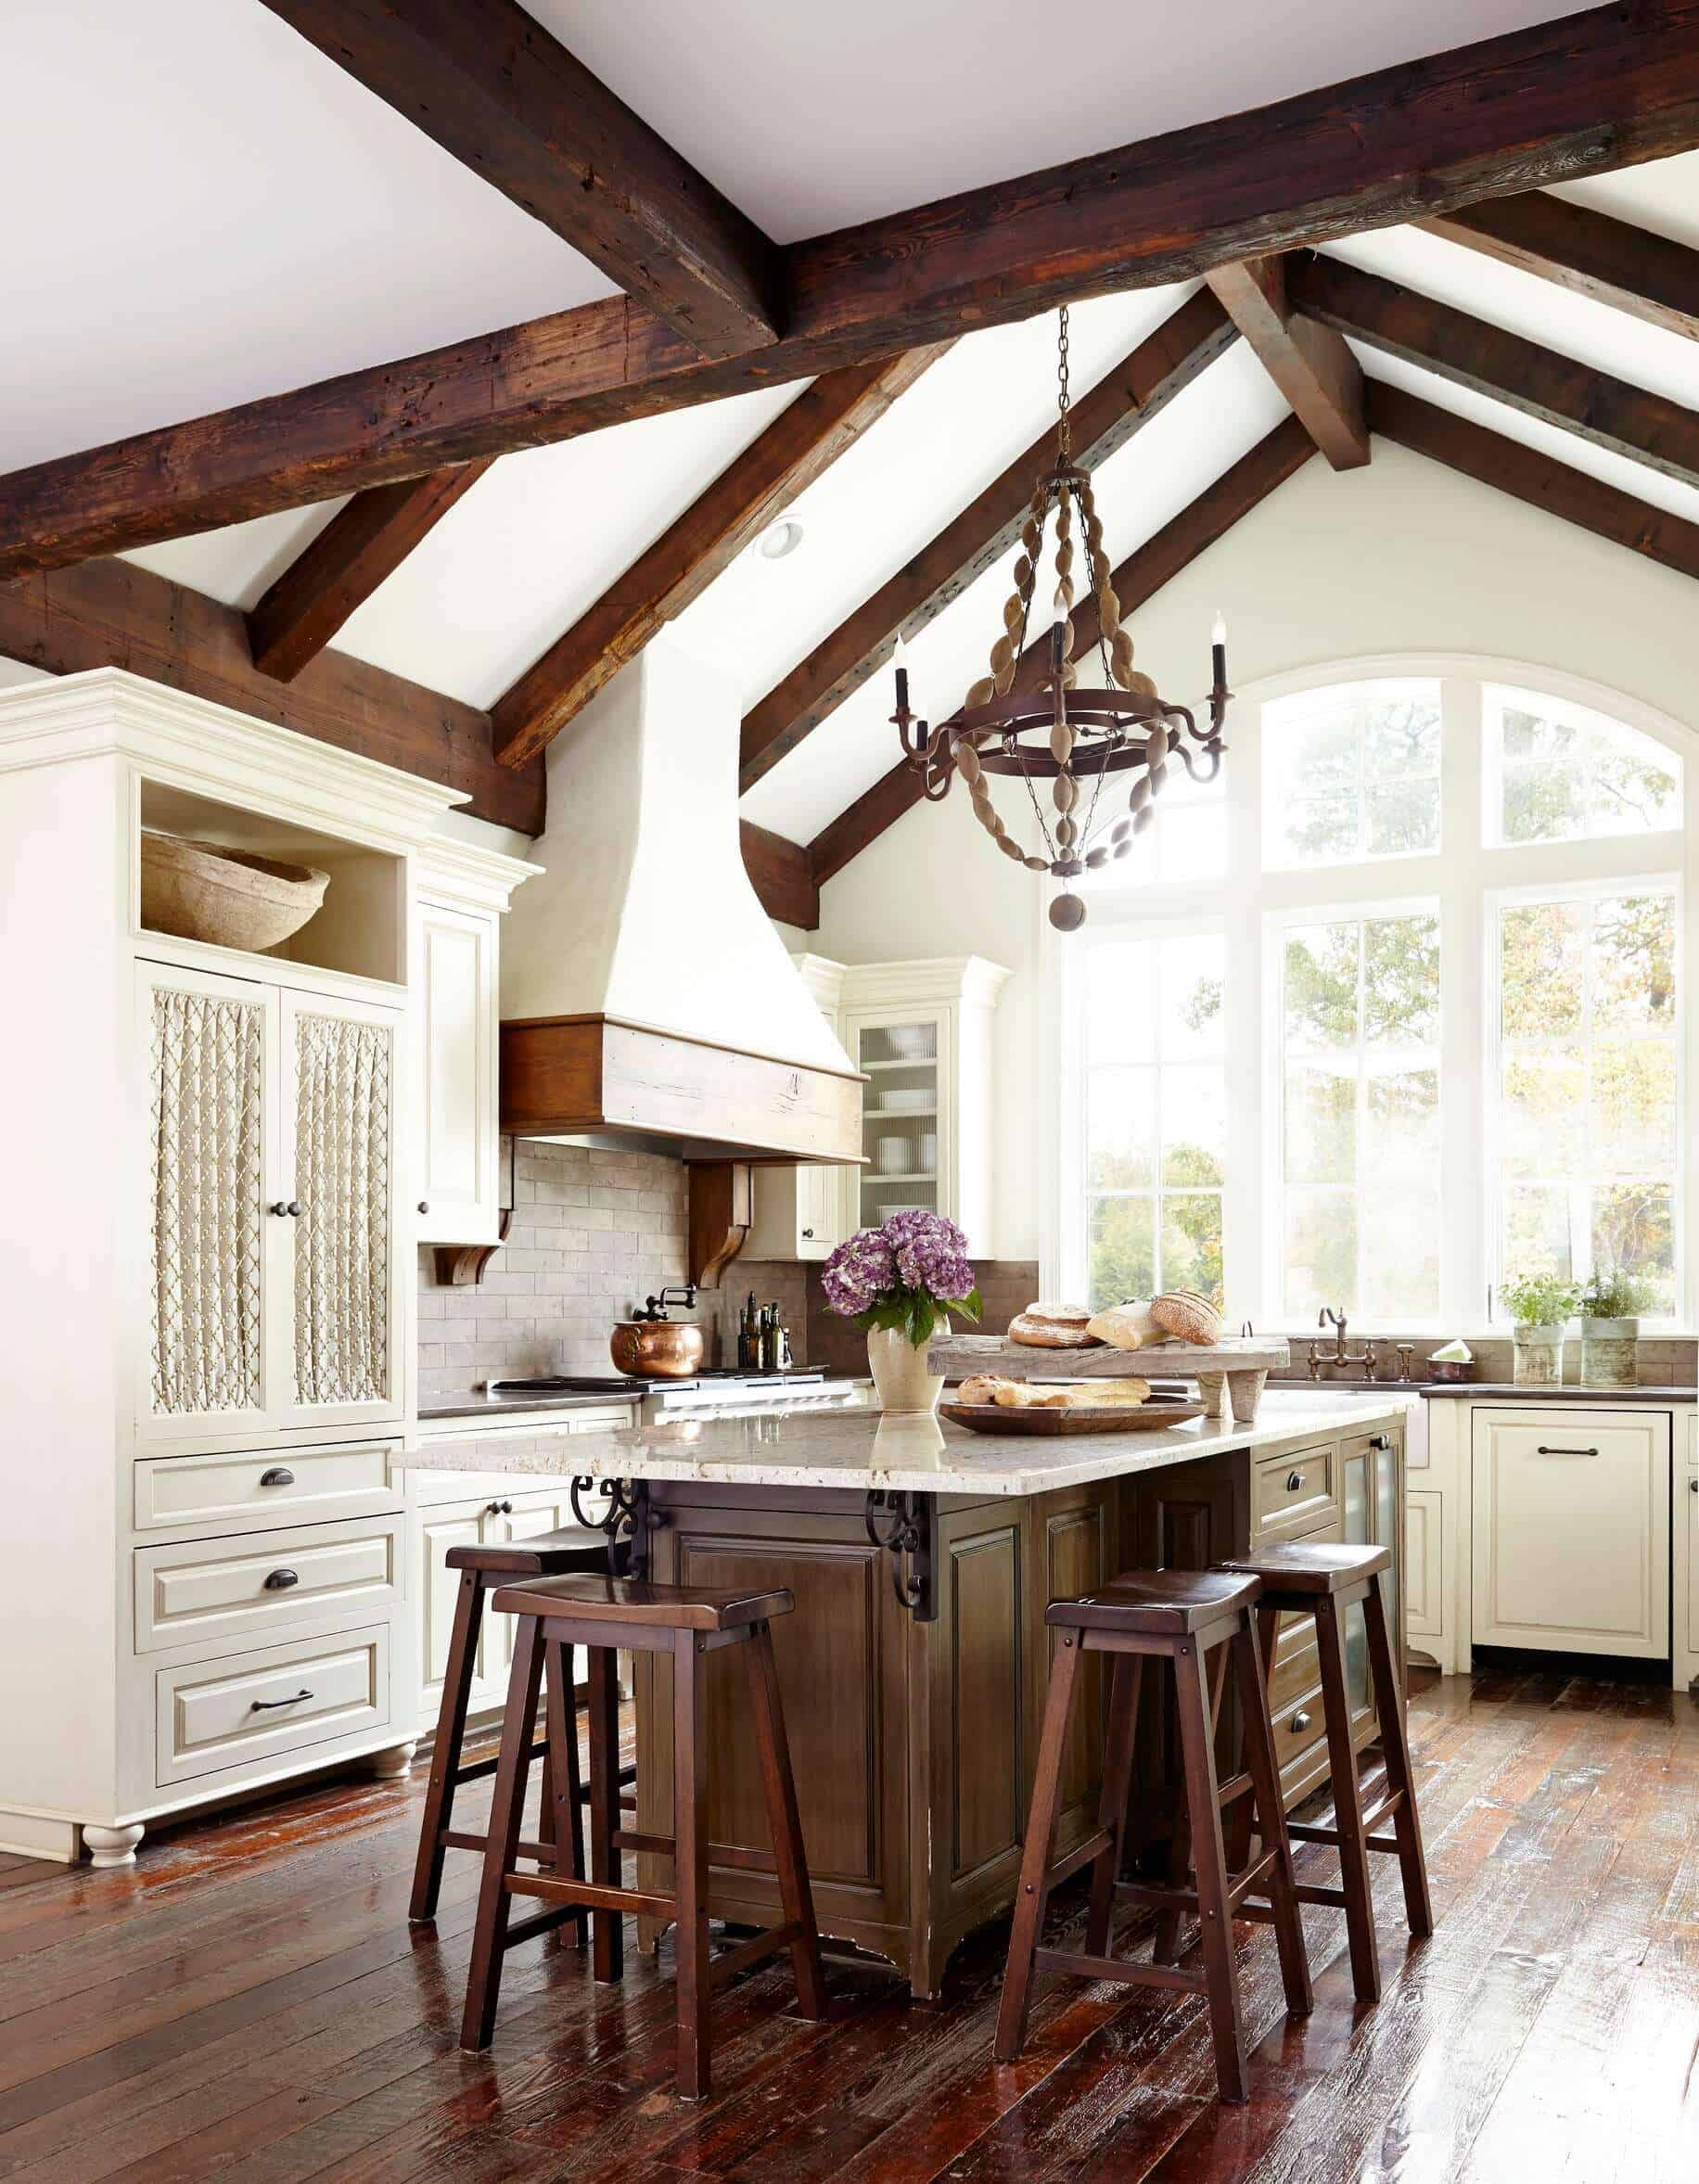 These French kitchen design pictures work as a useful tool for you to add to your decor vision board and planner for your new home kitchen. We invite you to pay attention to what makes these kitchens part of the French kitchen design. For more beautiful ideas go to https://thekitchenvibe.com